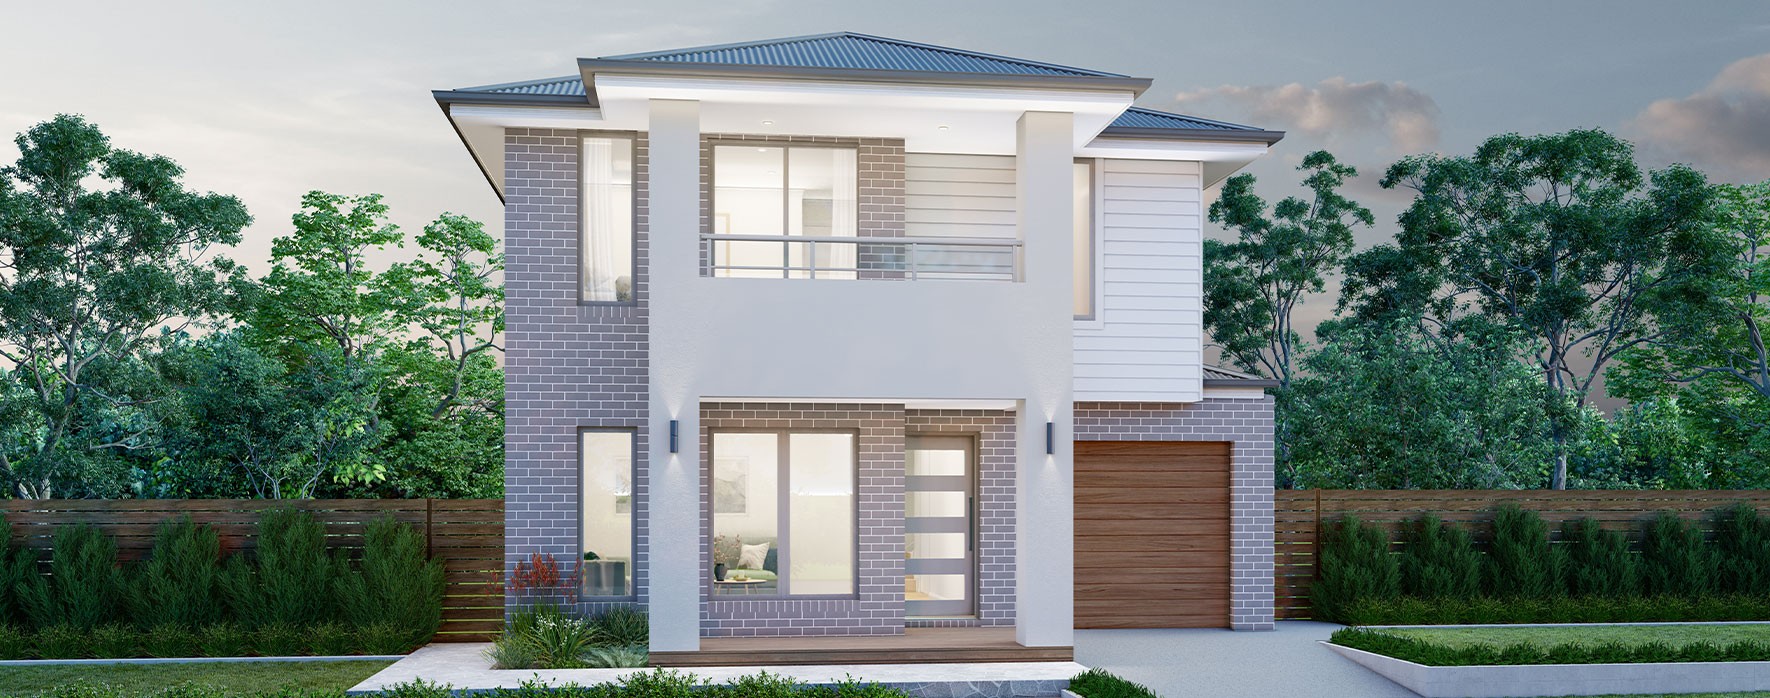 enmore-modern-with-balcony-double-storey-house-design